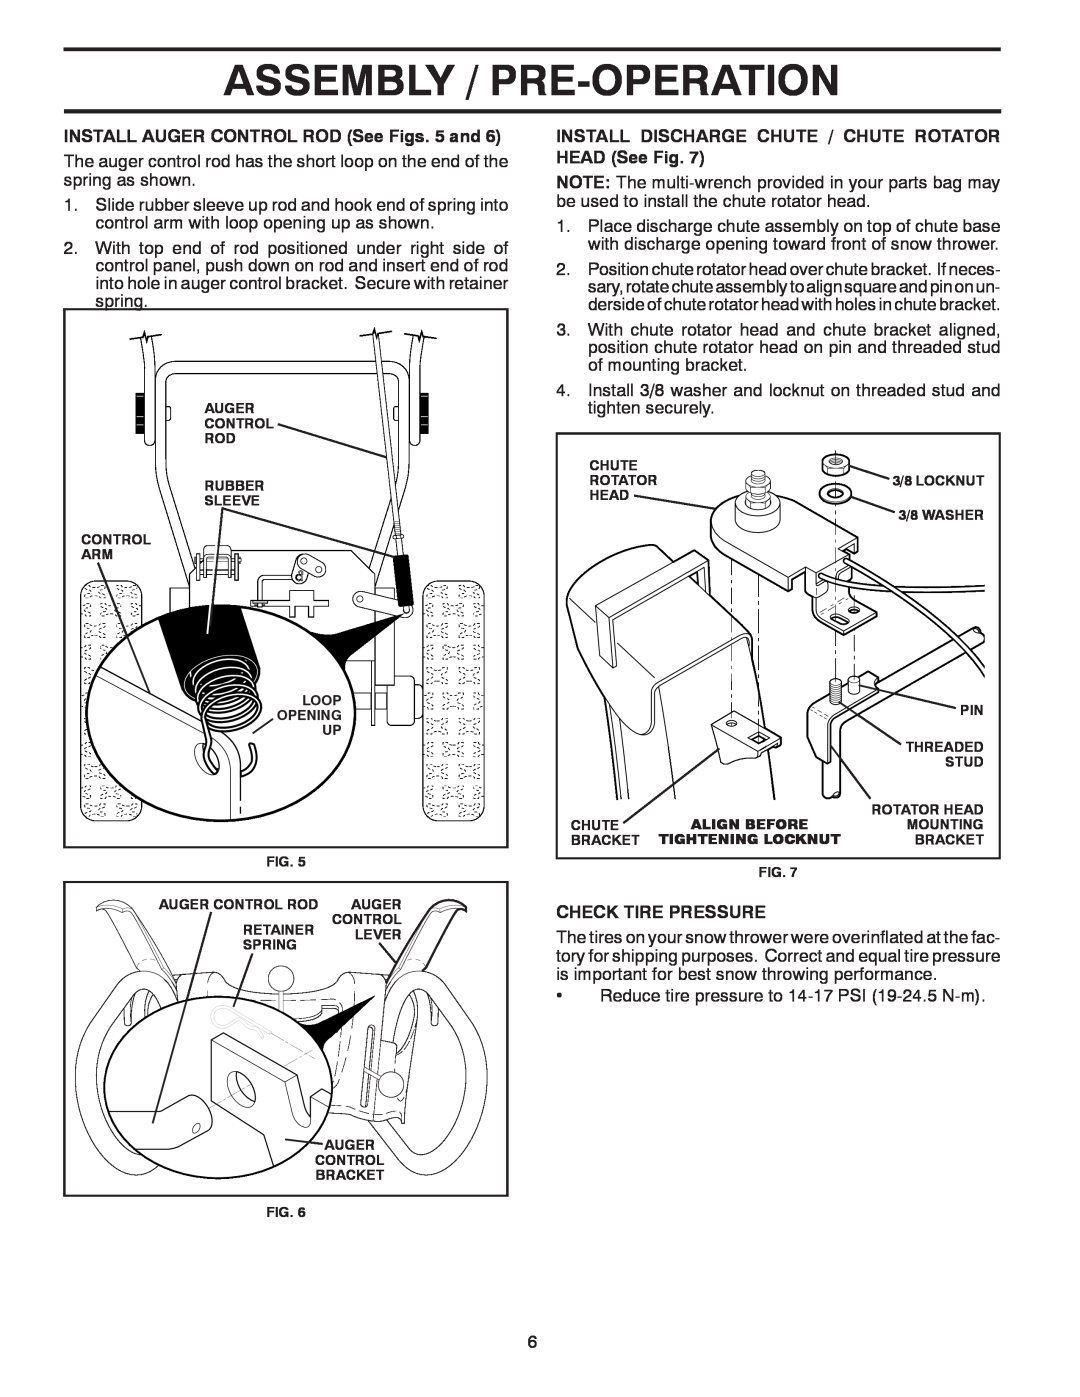 Poulan 415180 owner manual Assembly / Pre-Operation, INSTALL AUGER CONTROL ROD See Figs. 5 and, Check Tire Pressure 